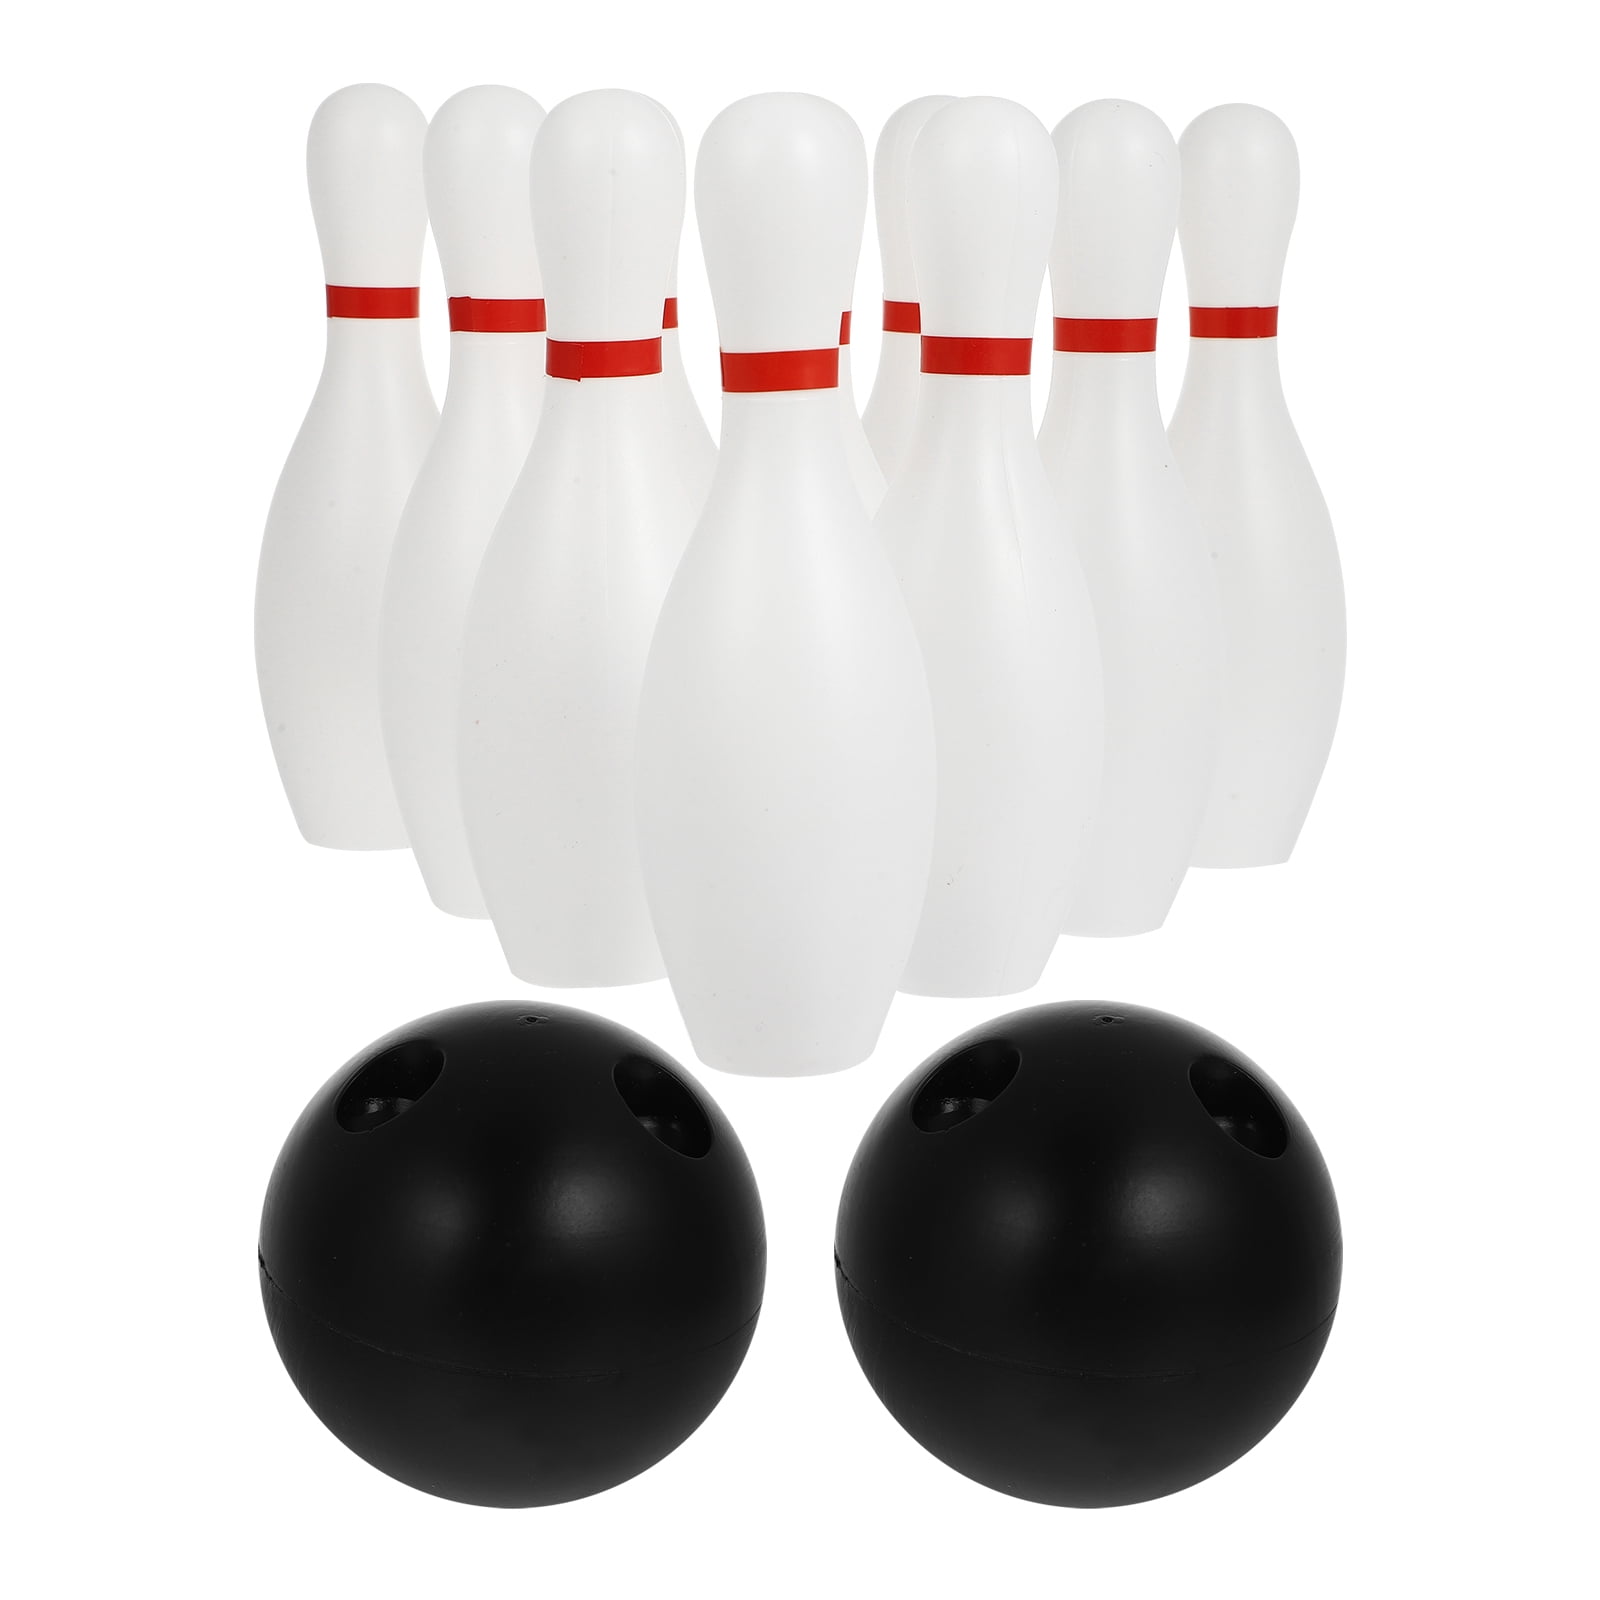 Perfect Kids Bowling Set and Mini Tabletop Bowling Toy for Your Little Players Easy to Assemble and Play Best Interactive Desktop Game for Kids and Adults Mini Juego de Bolos de Madera con Lane 